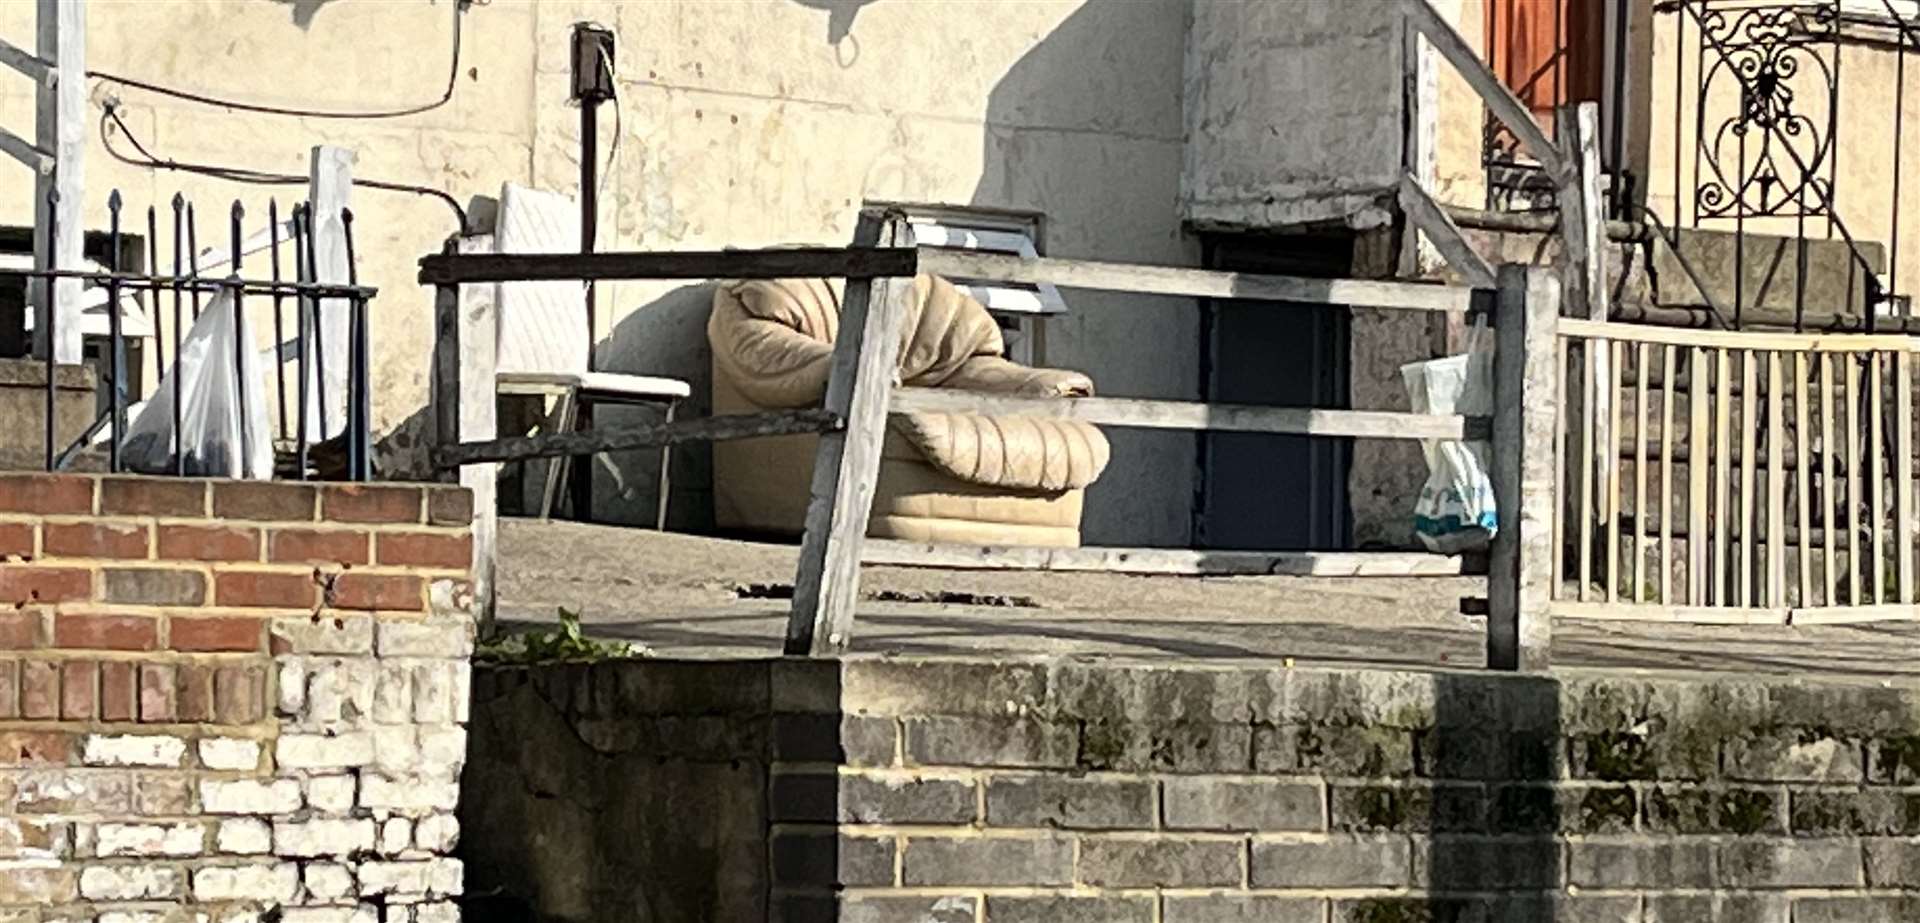 Furniture left outside houses on Luton Road, Chatham